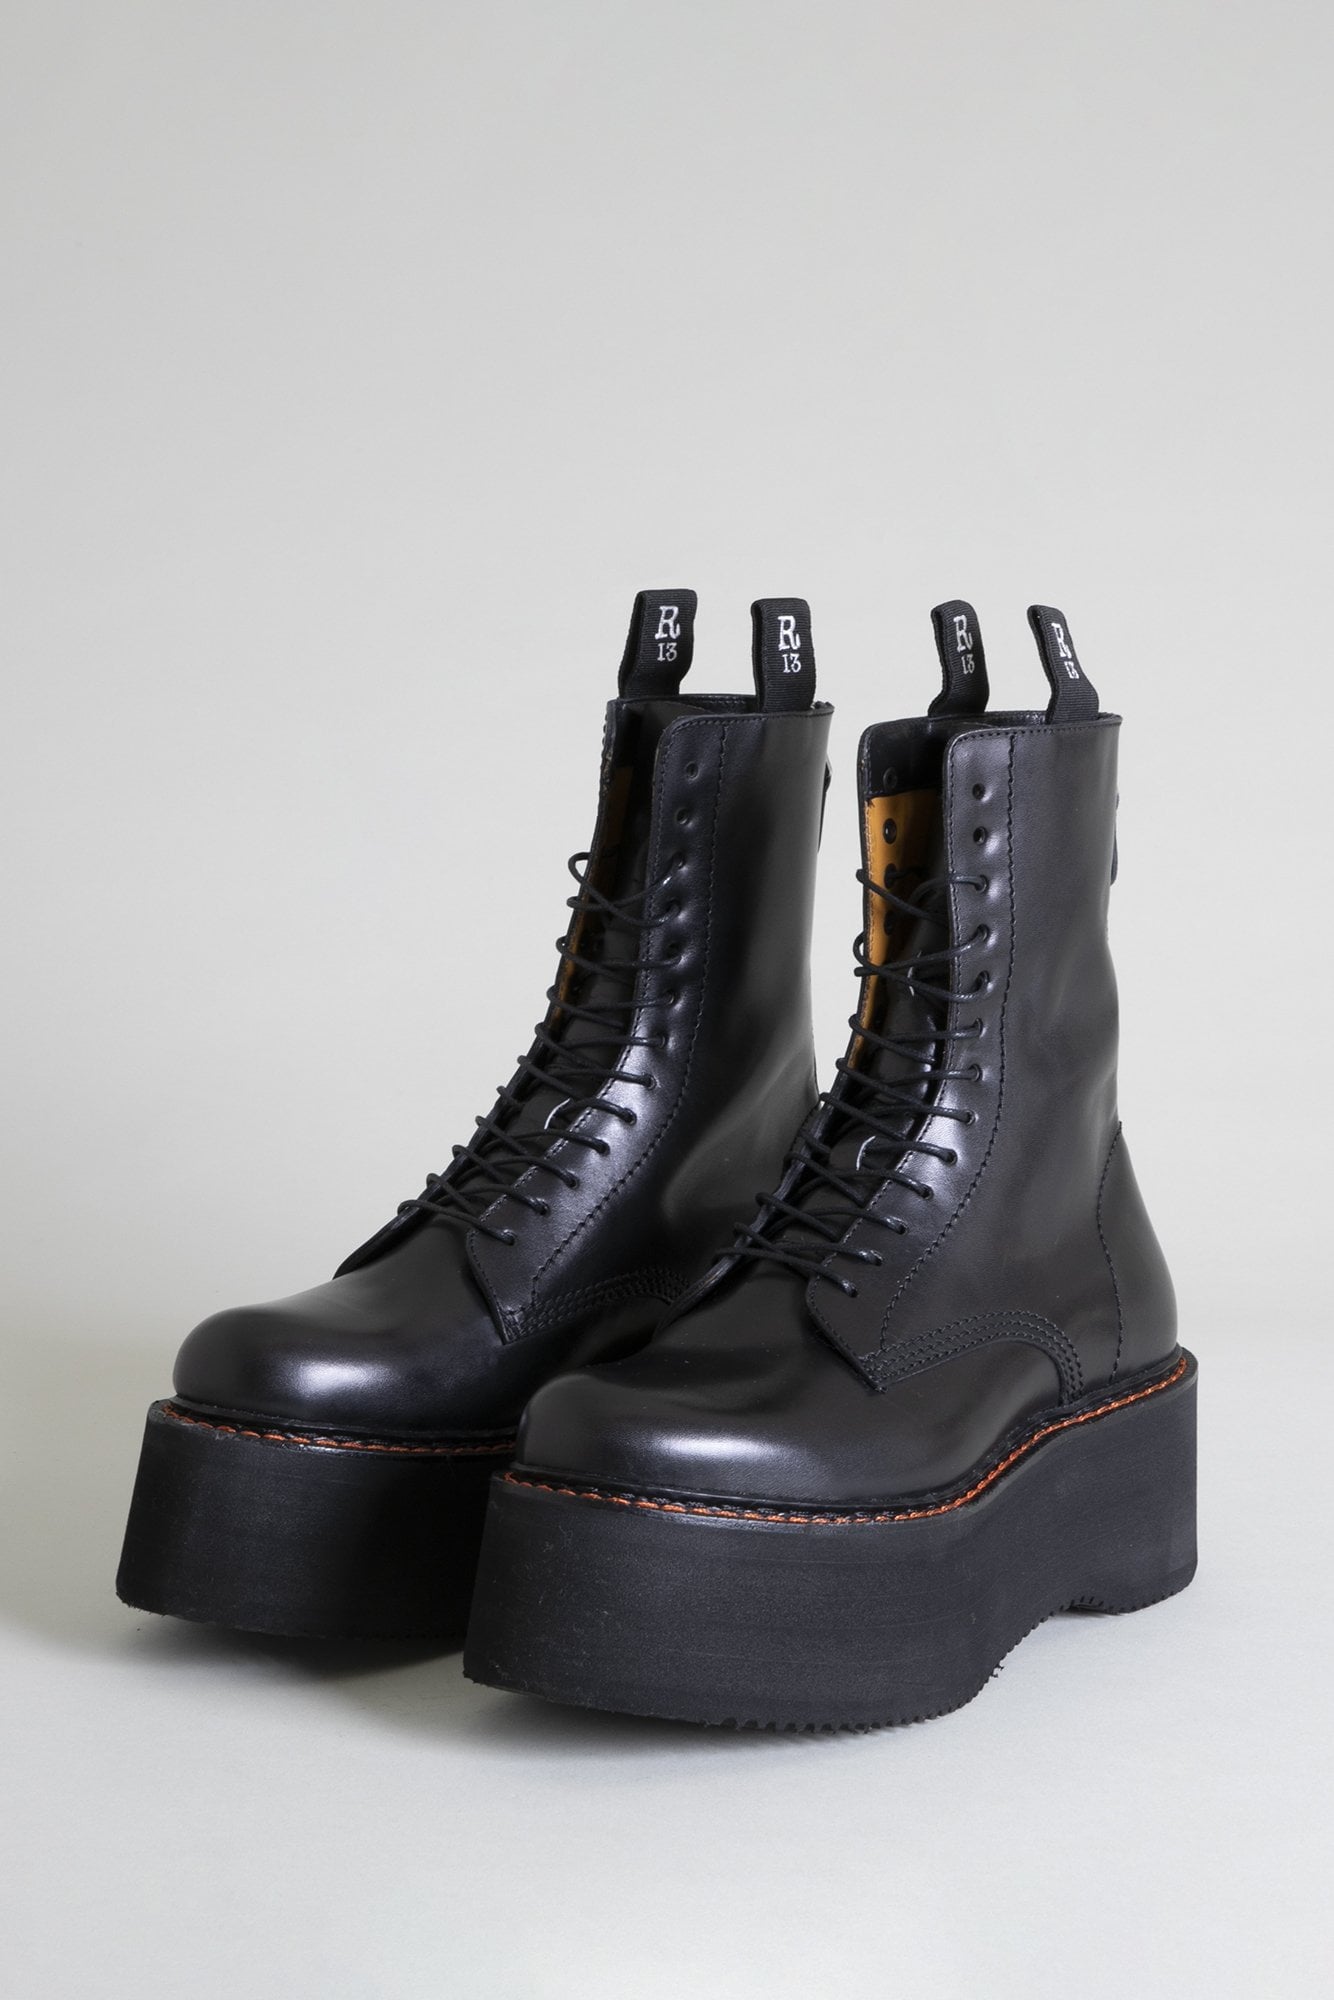 Double Stack Boot - Black | R13 Denim Official Site